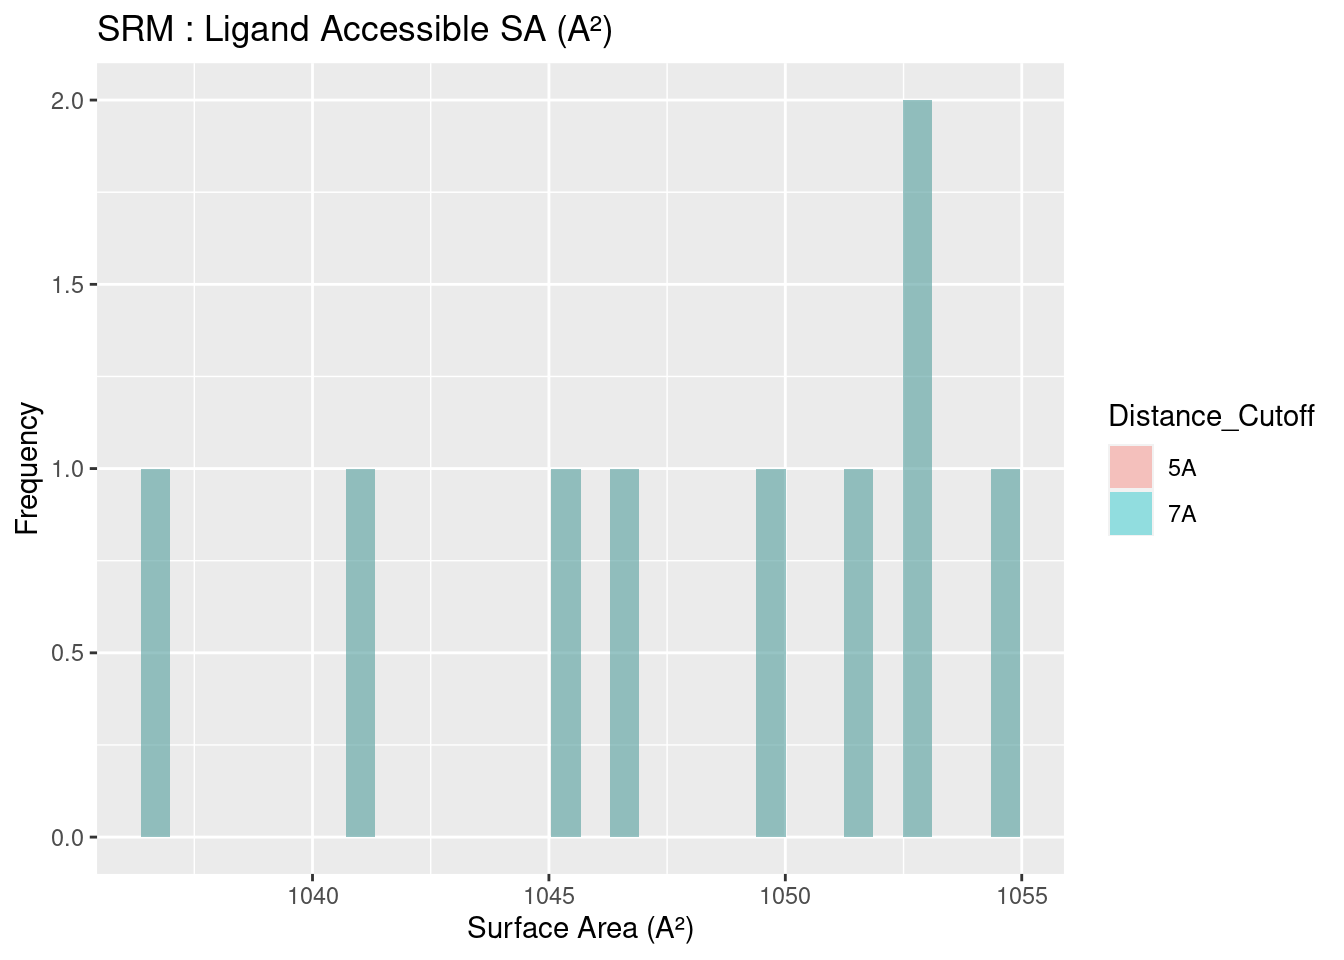 SRM: Ligand Accessible Surface Area